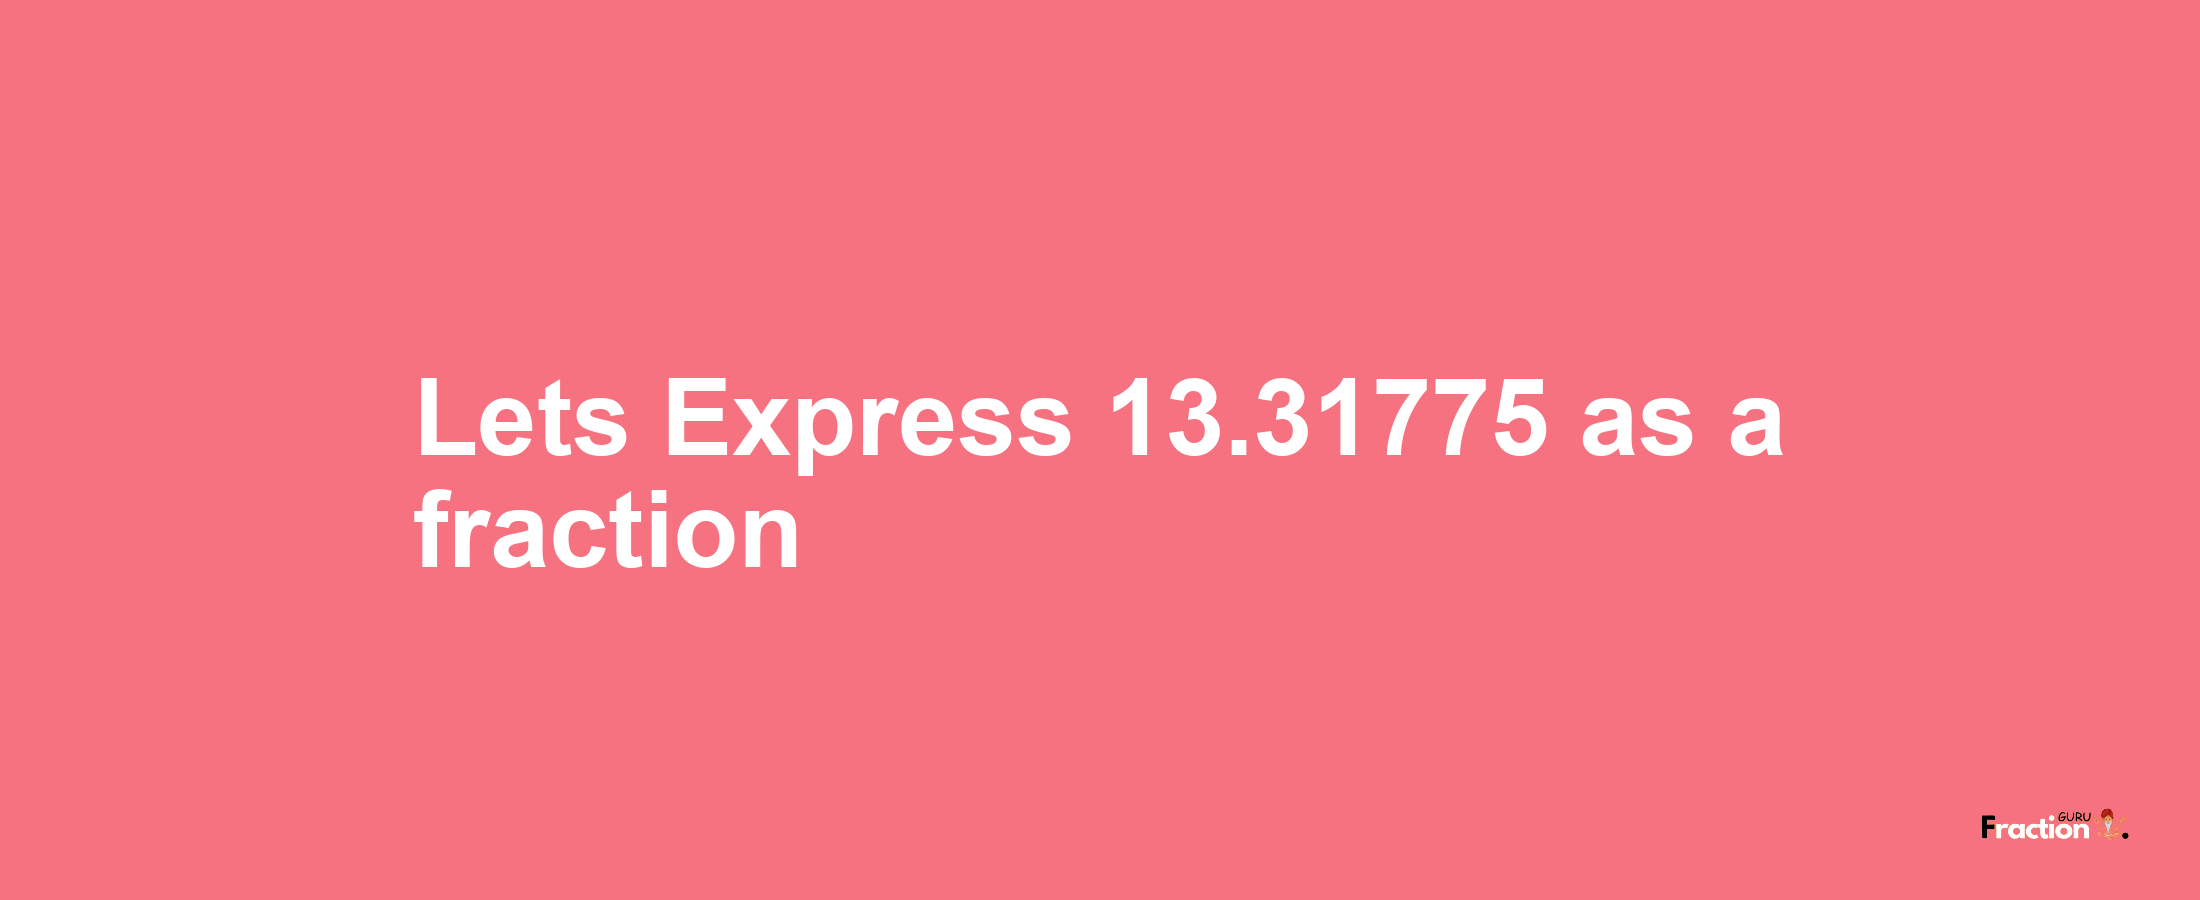 Lets Express 13.31775 as afraction